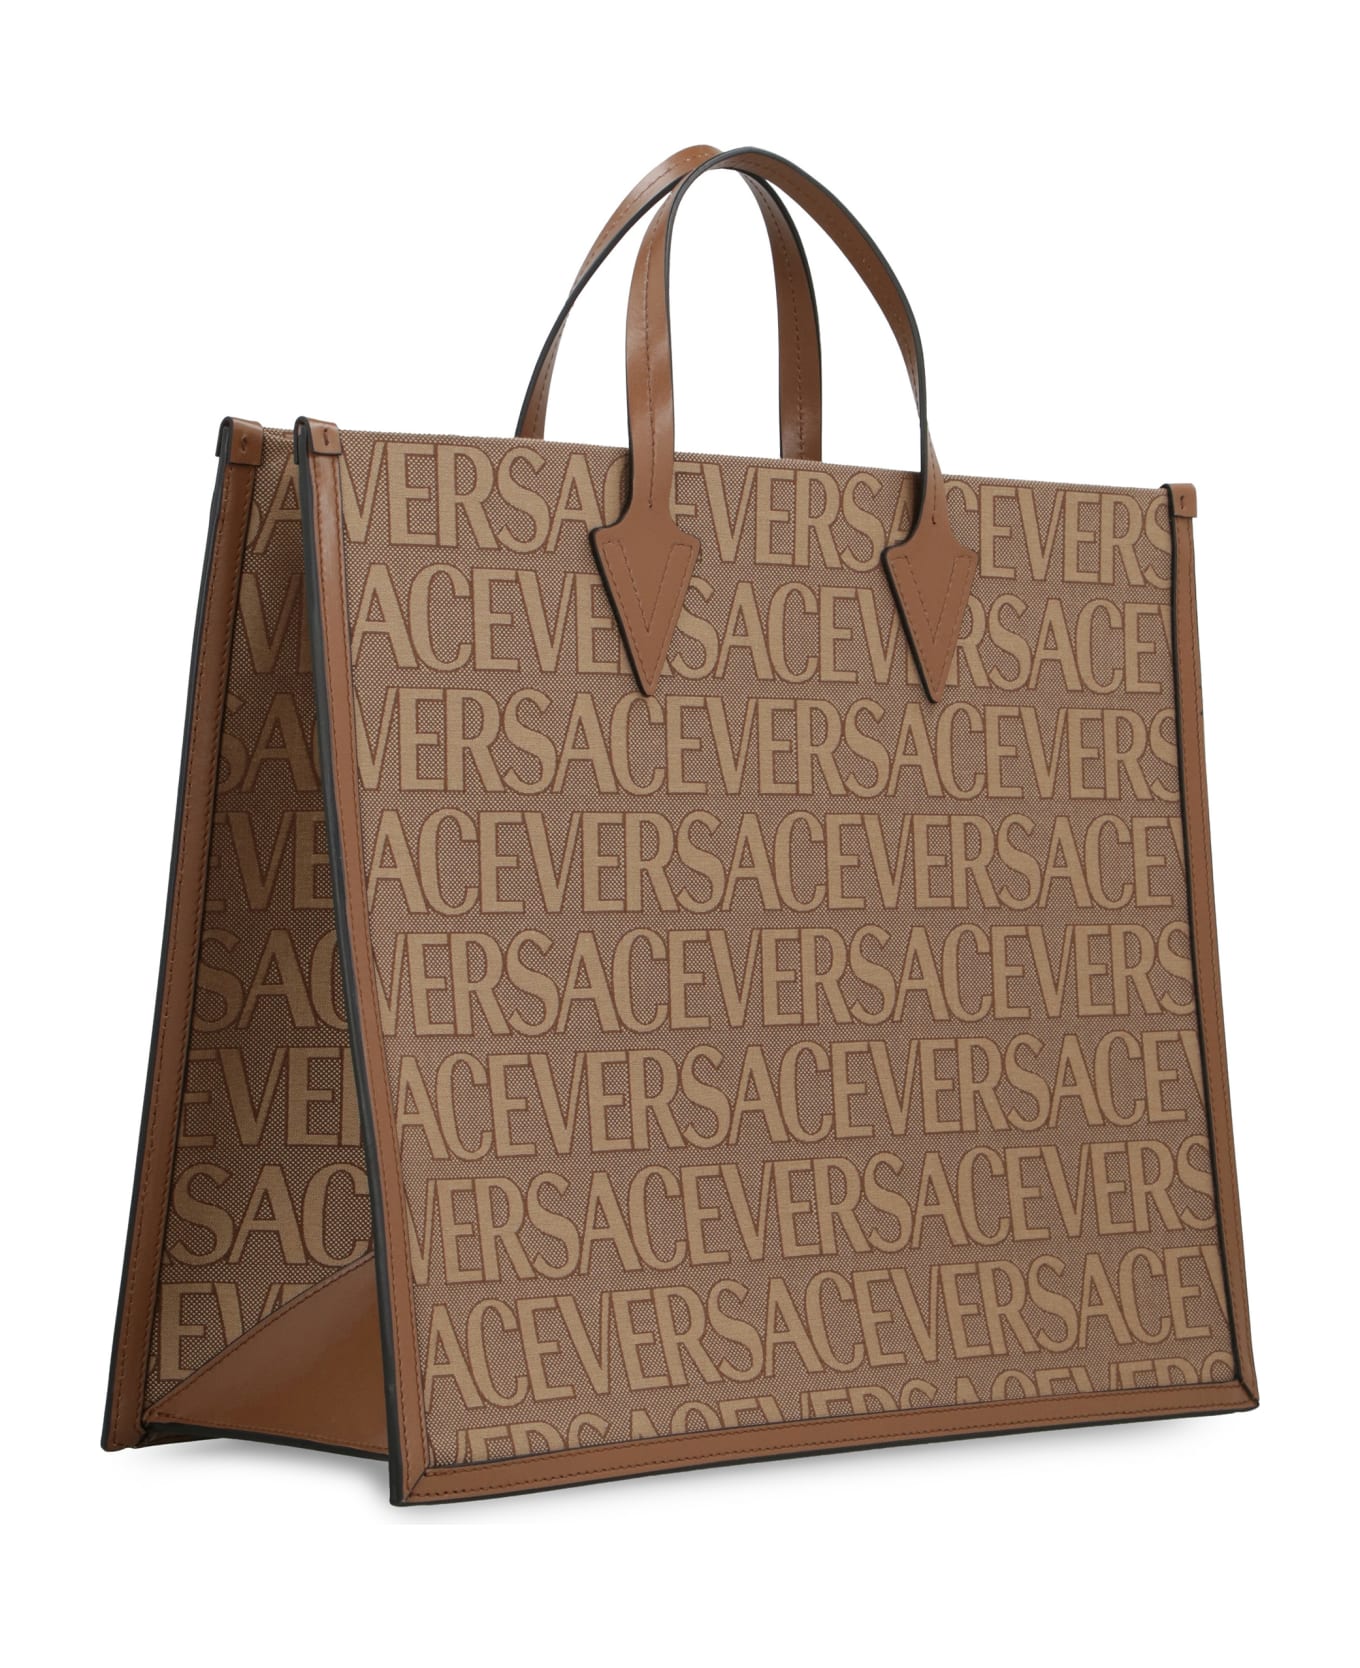 Versace Canvas And Leather Shopping Bag - Beige